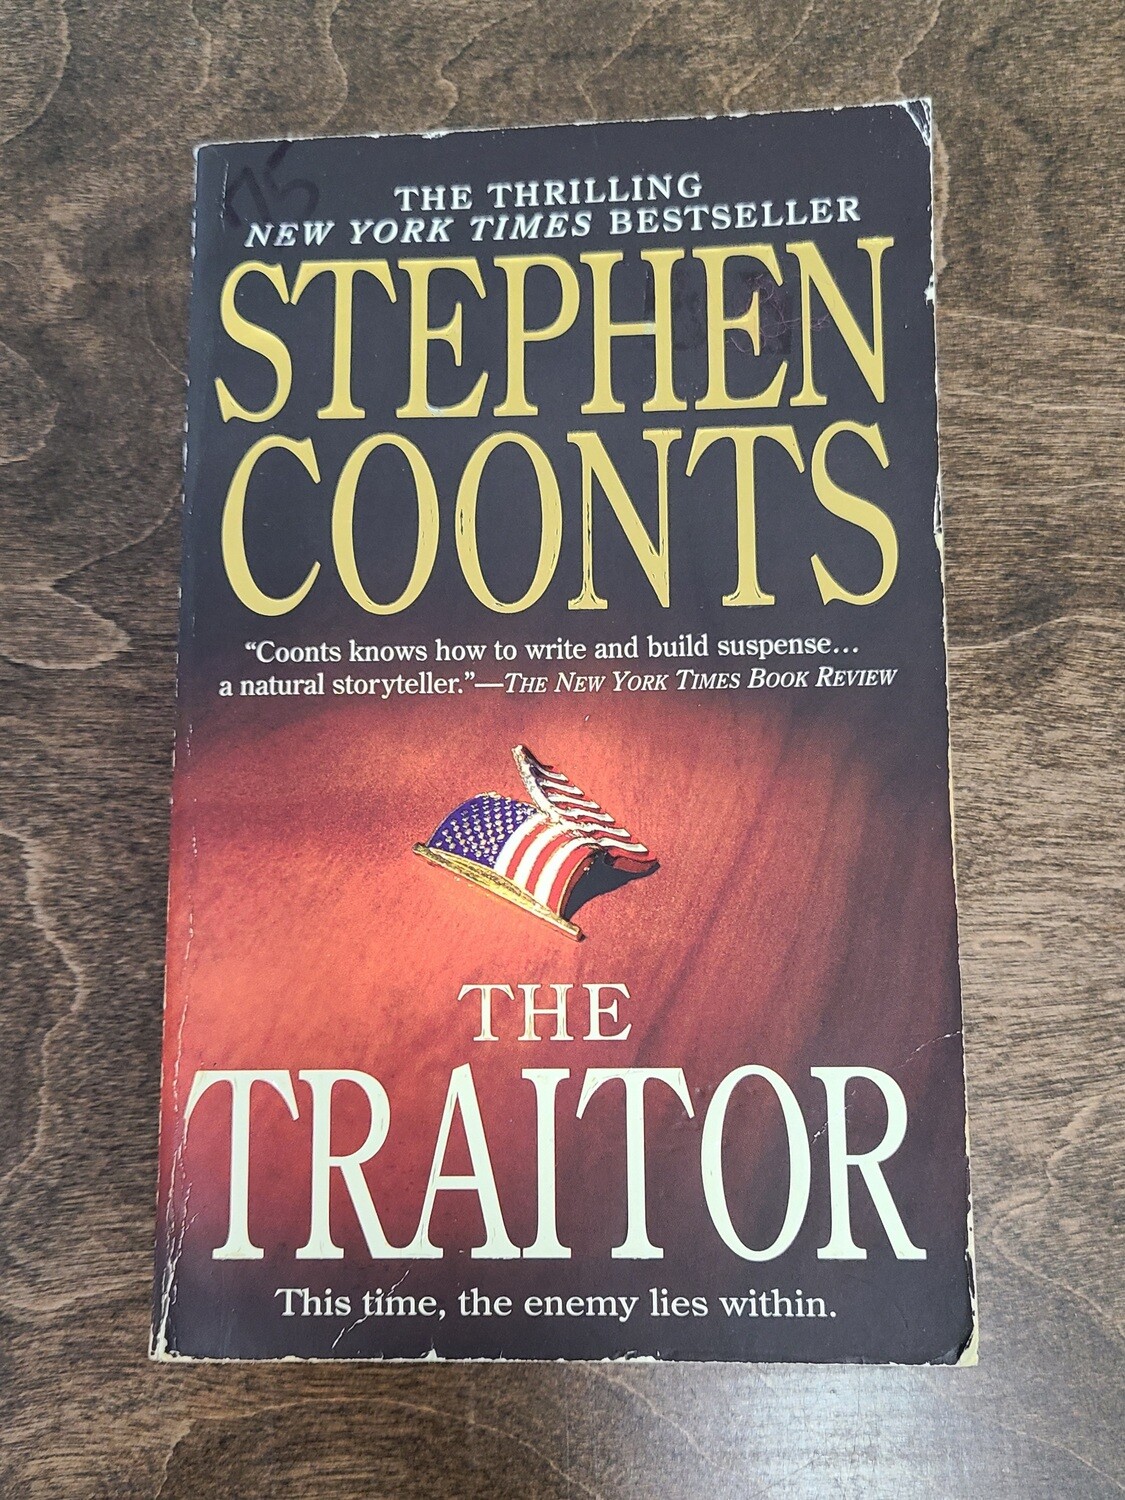 The Traitor by Stephen Coonts